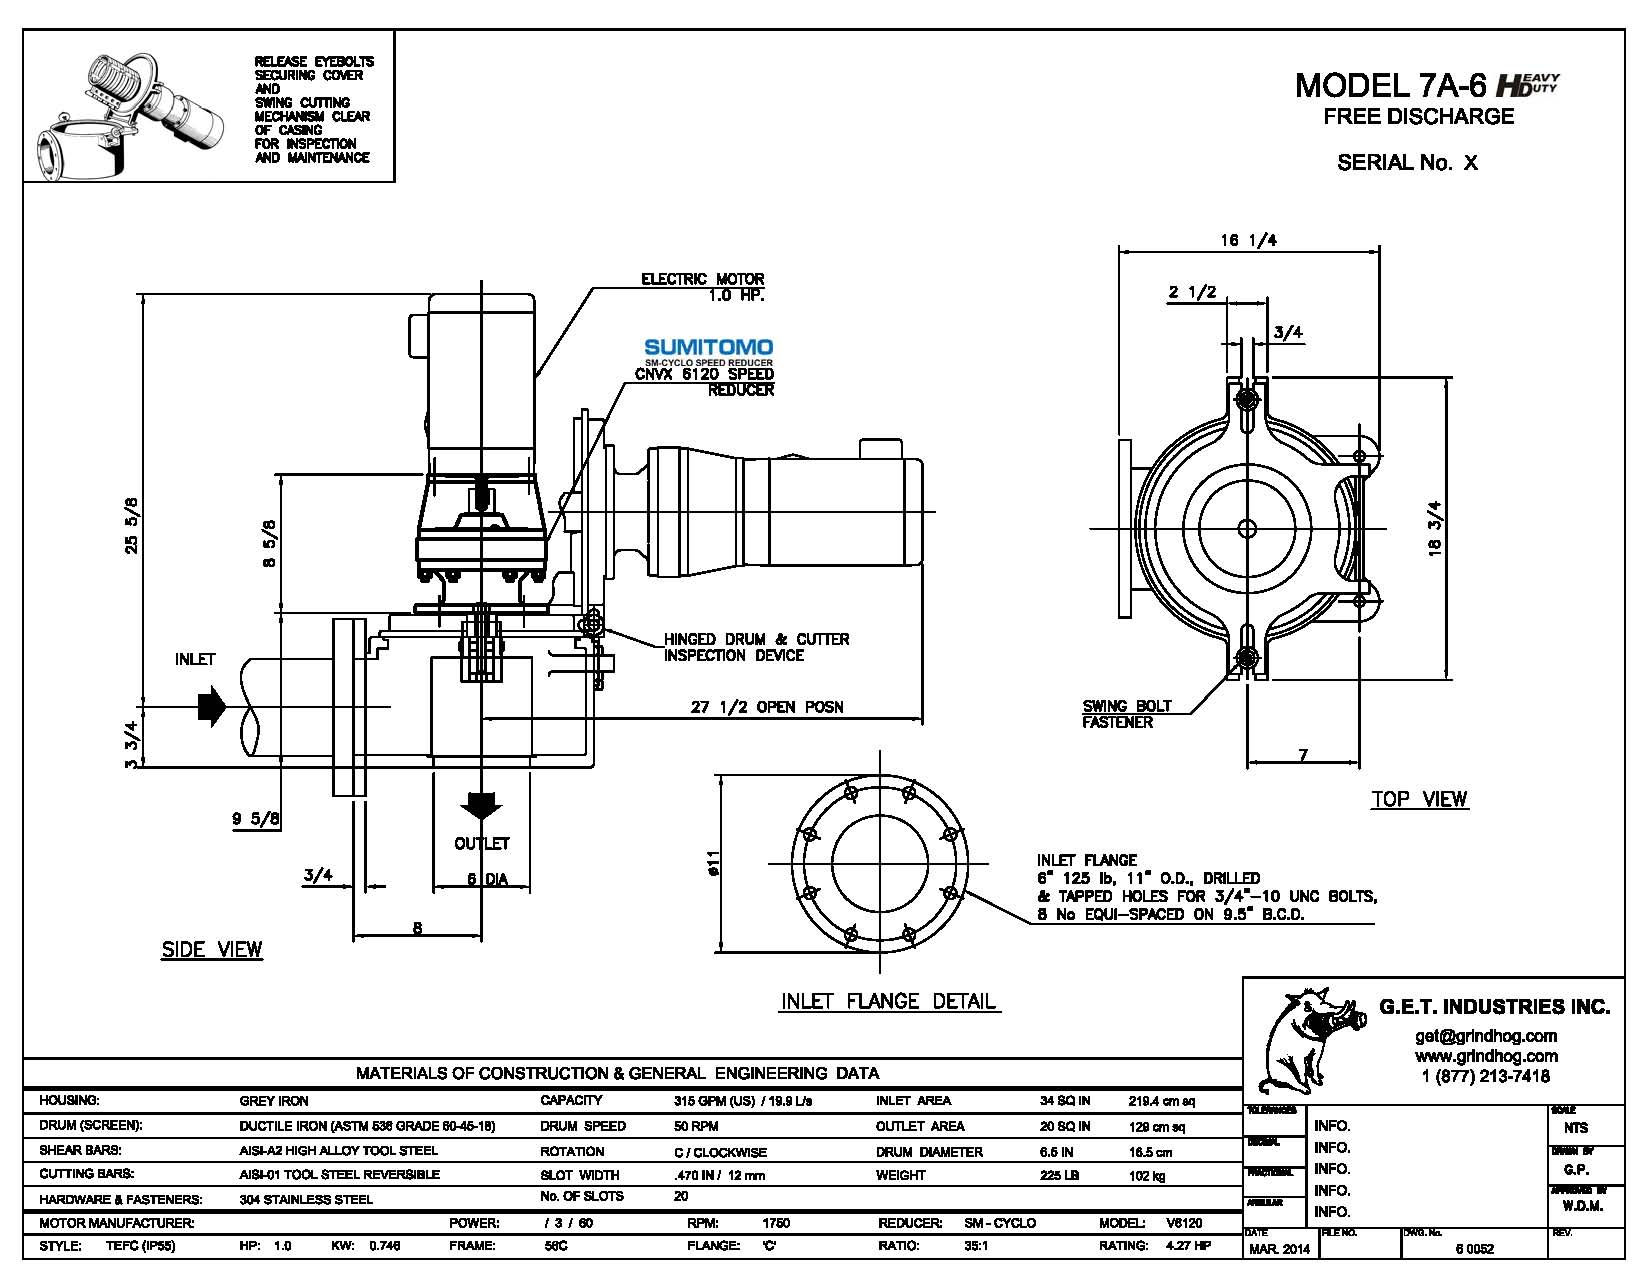 data drawing for Model 7A-6